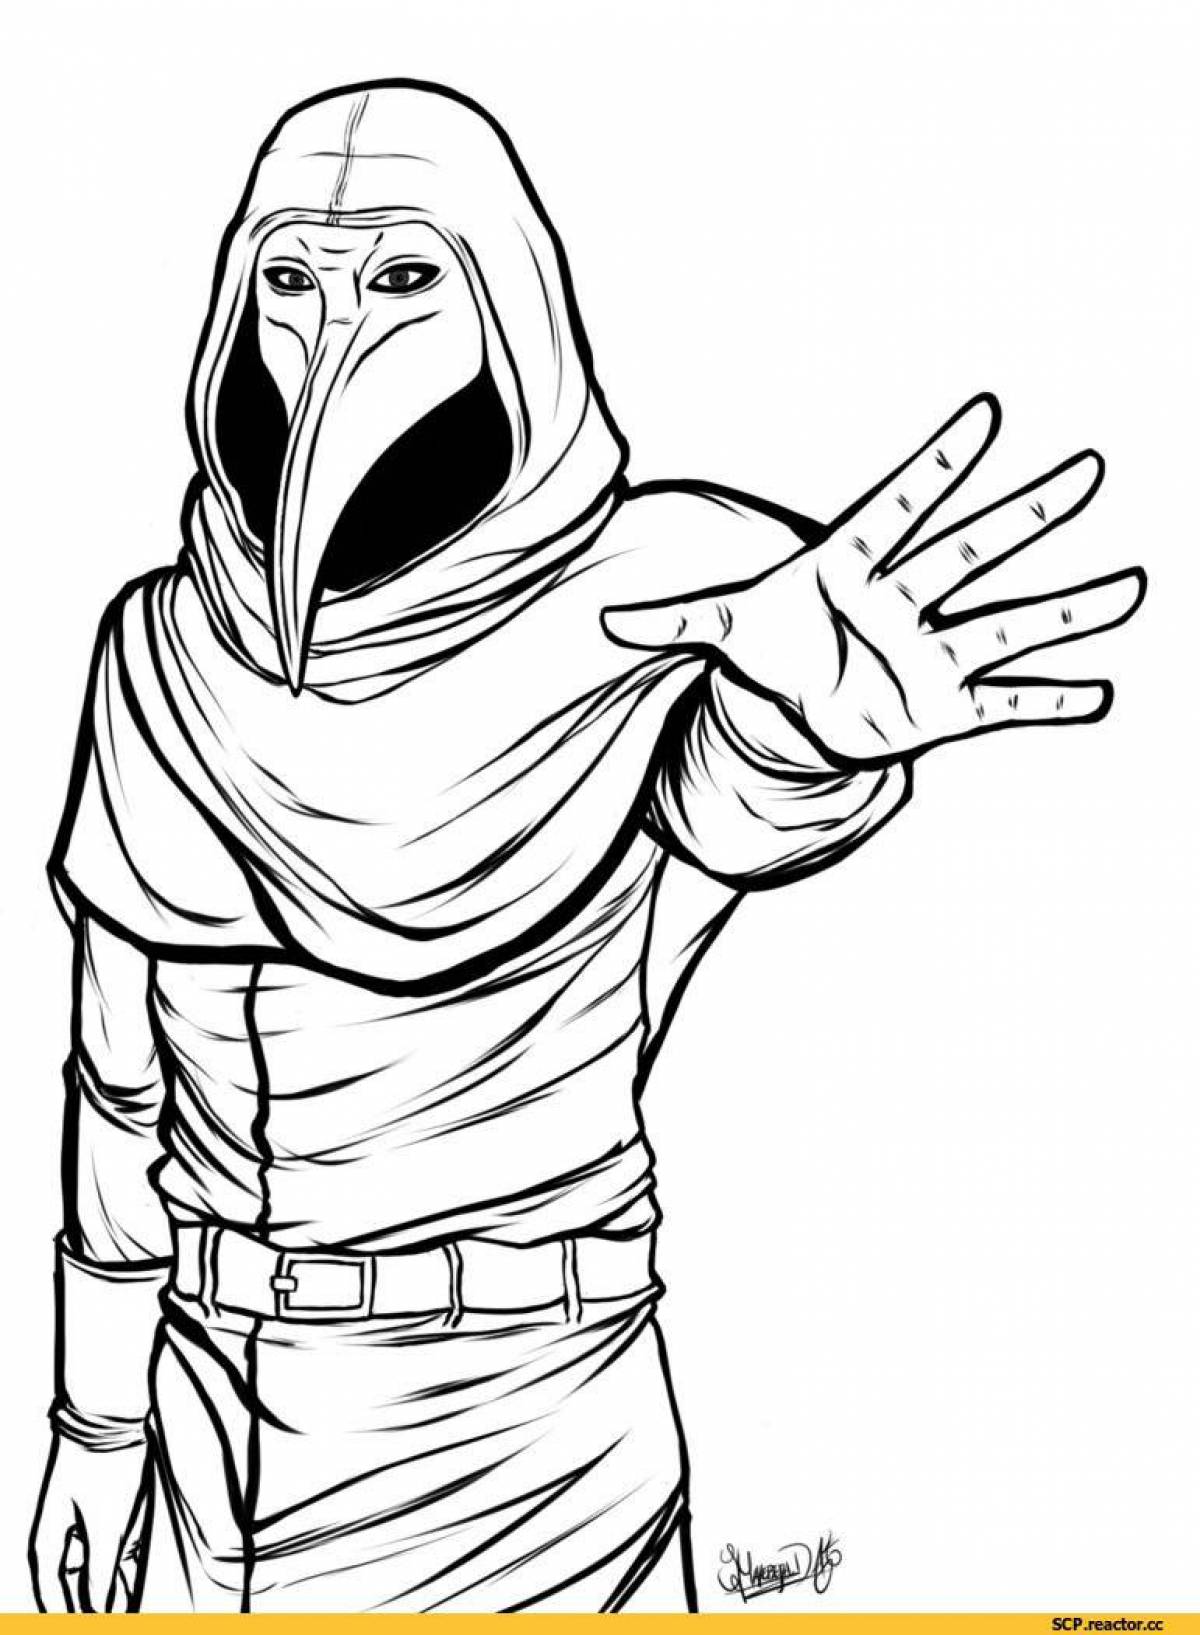 Tempting scp coloring page